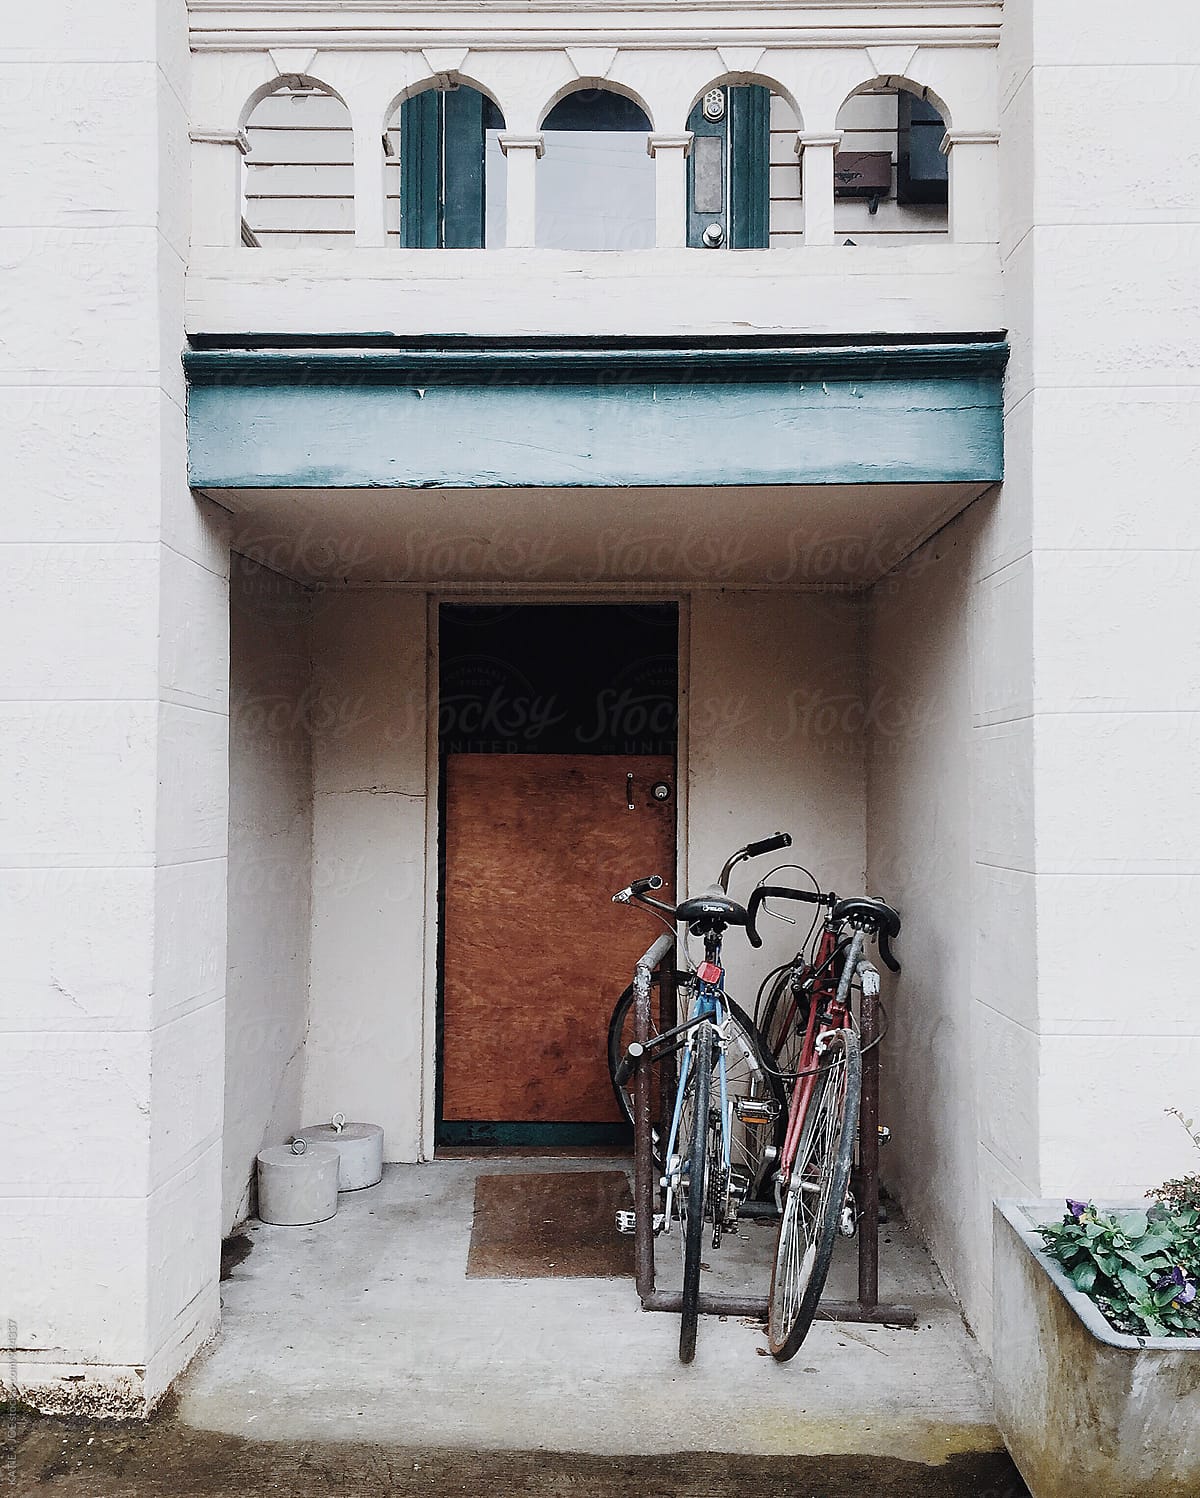 Two bikes leaning against a wall by a brown door